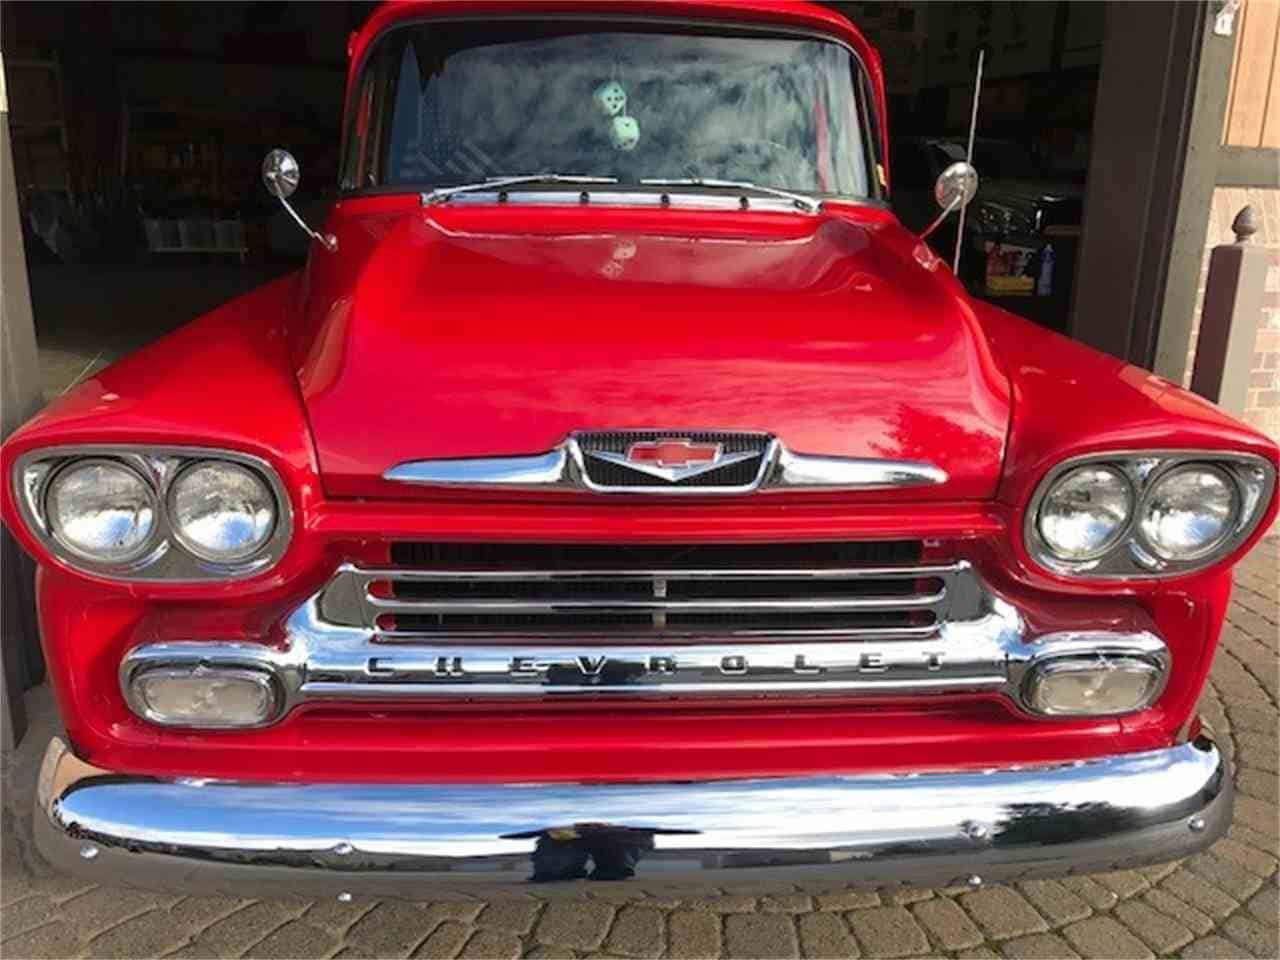 Pickup pick up lines for Valentine’s Day | ClassicCars.com Journal